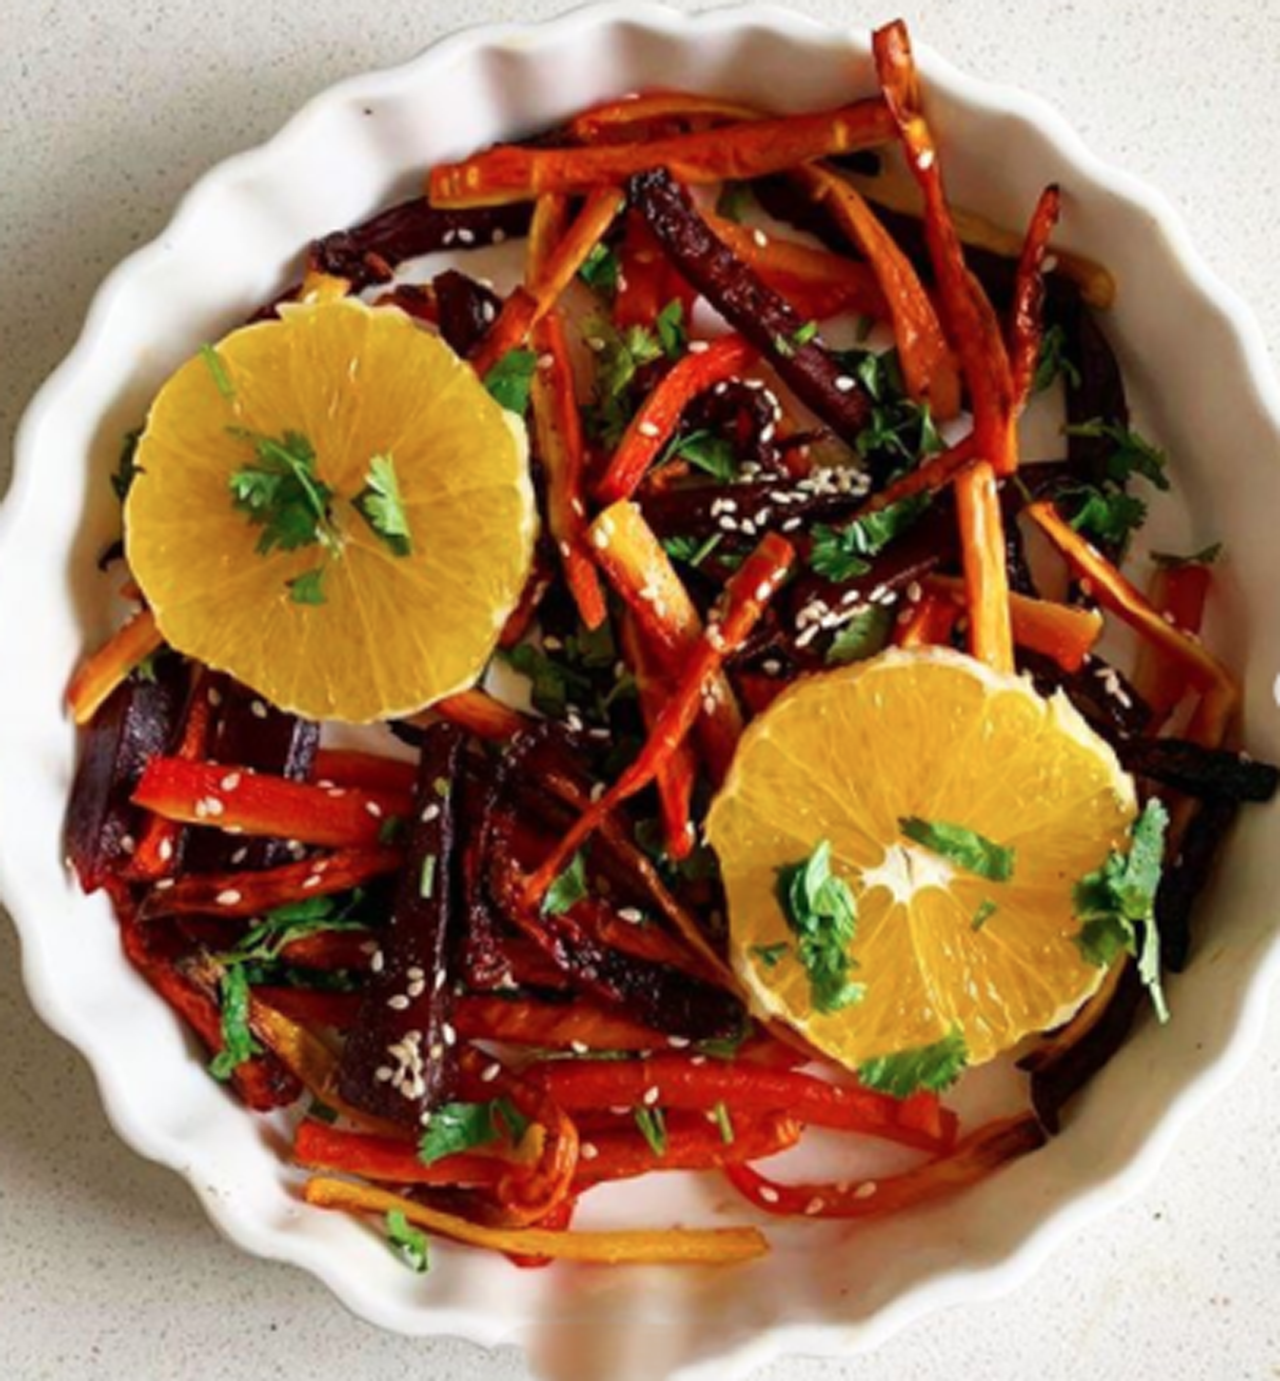 Roasted carrot and beetroot salad